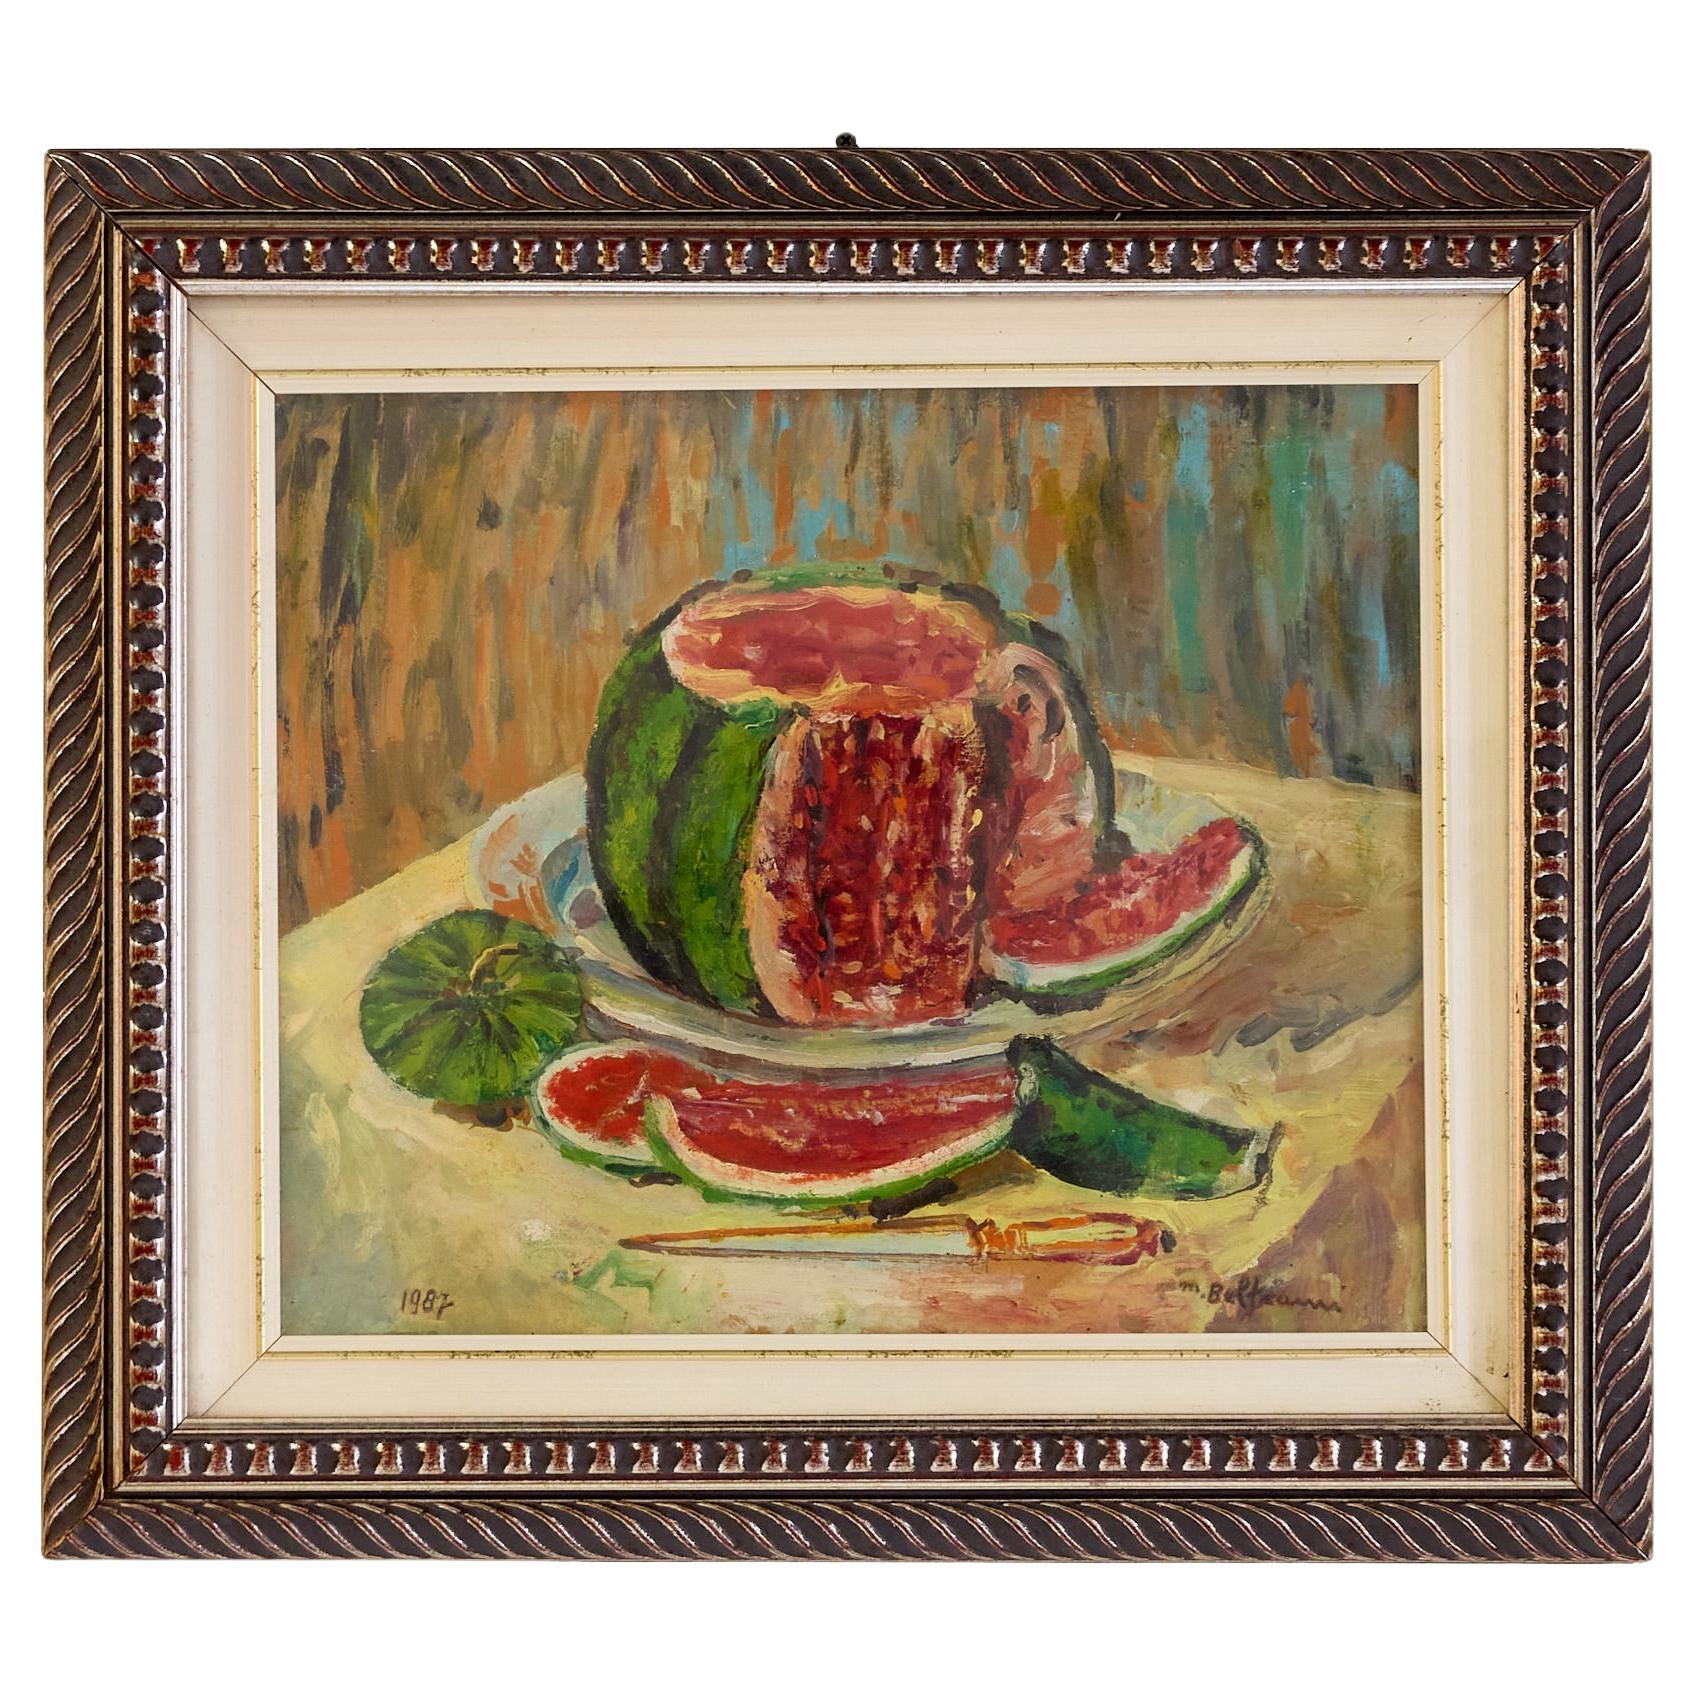 Italian Impressionistic Watermelon Painting by Mario Beltrami For Sale